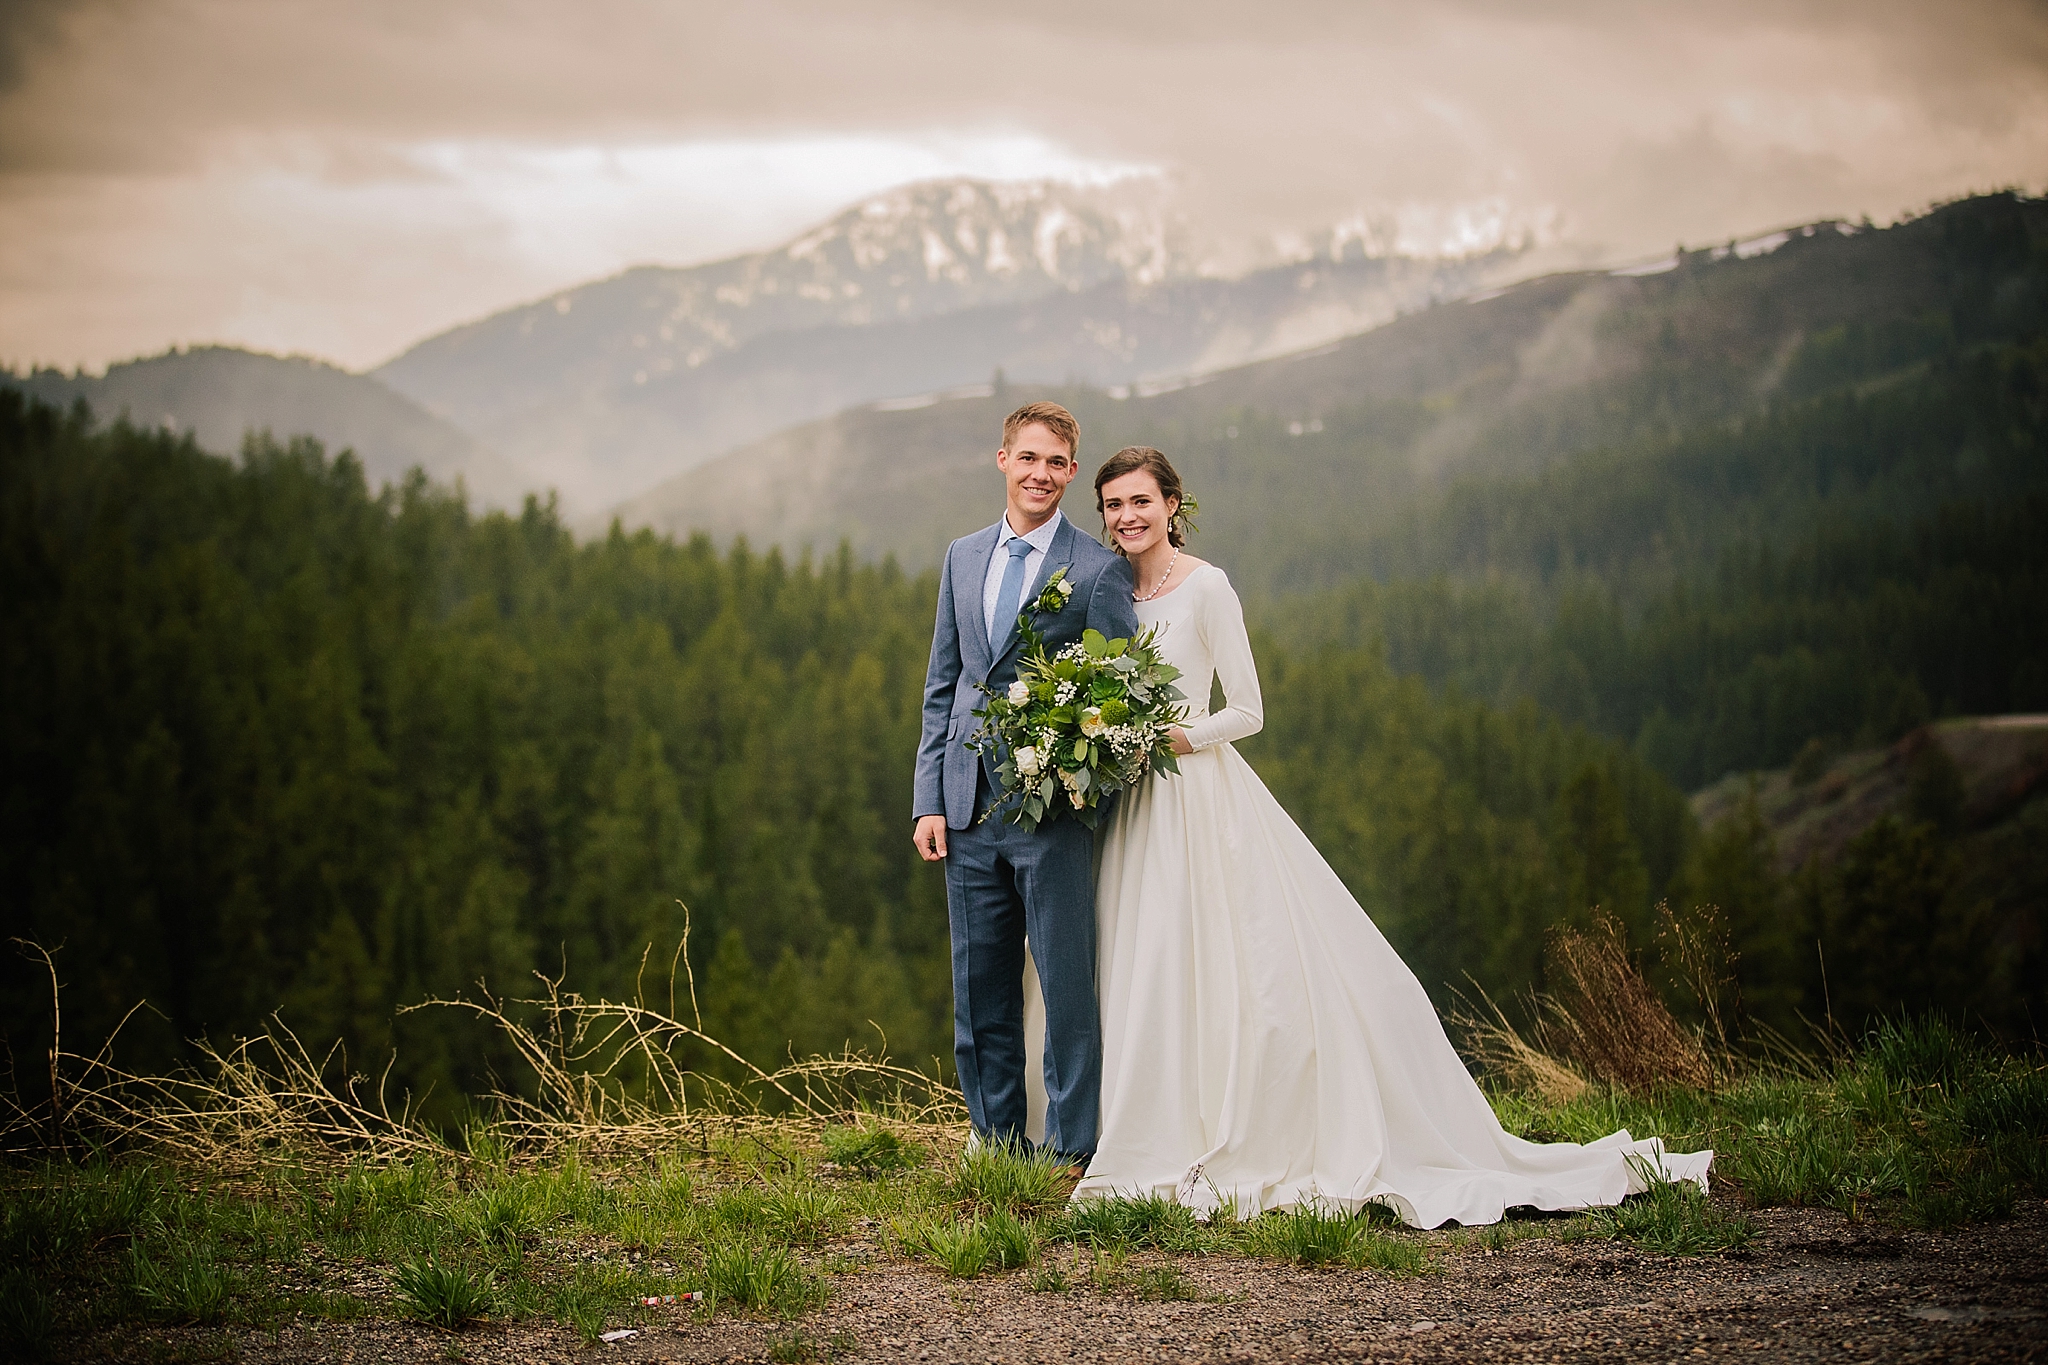 Jackson Hole wedding photographer captures bride and groom standing on top of mountain during outdoor bridals